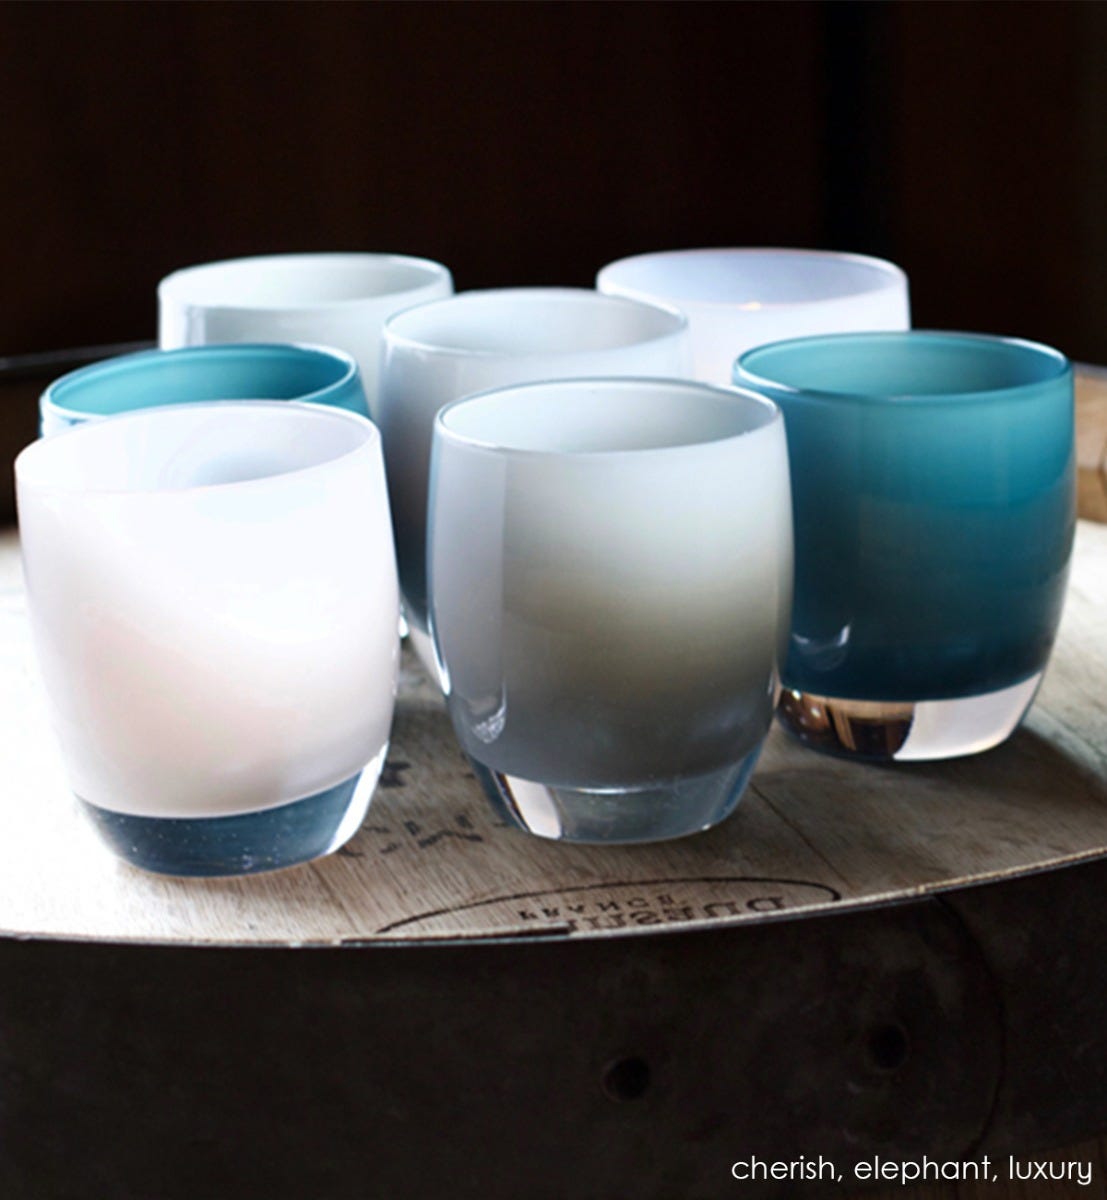 elephant shaded gray hand-blown glass votive candle holder. Paired with cherish and luxury.